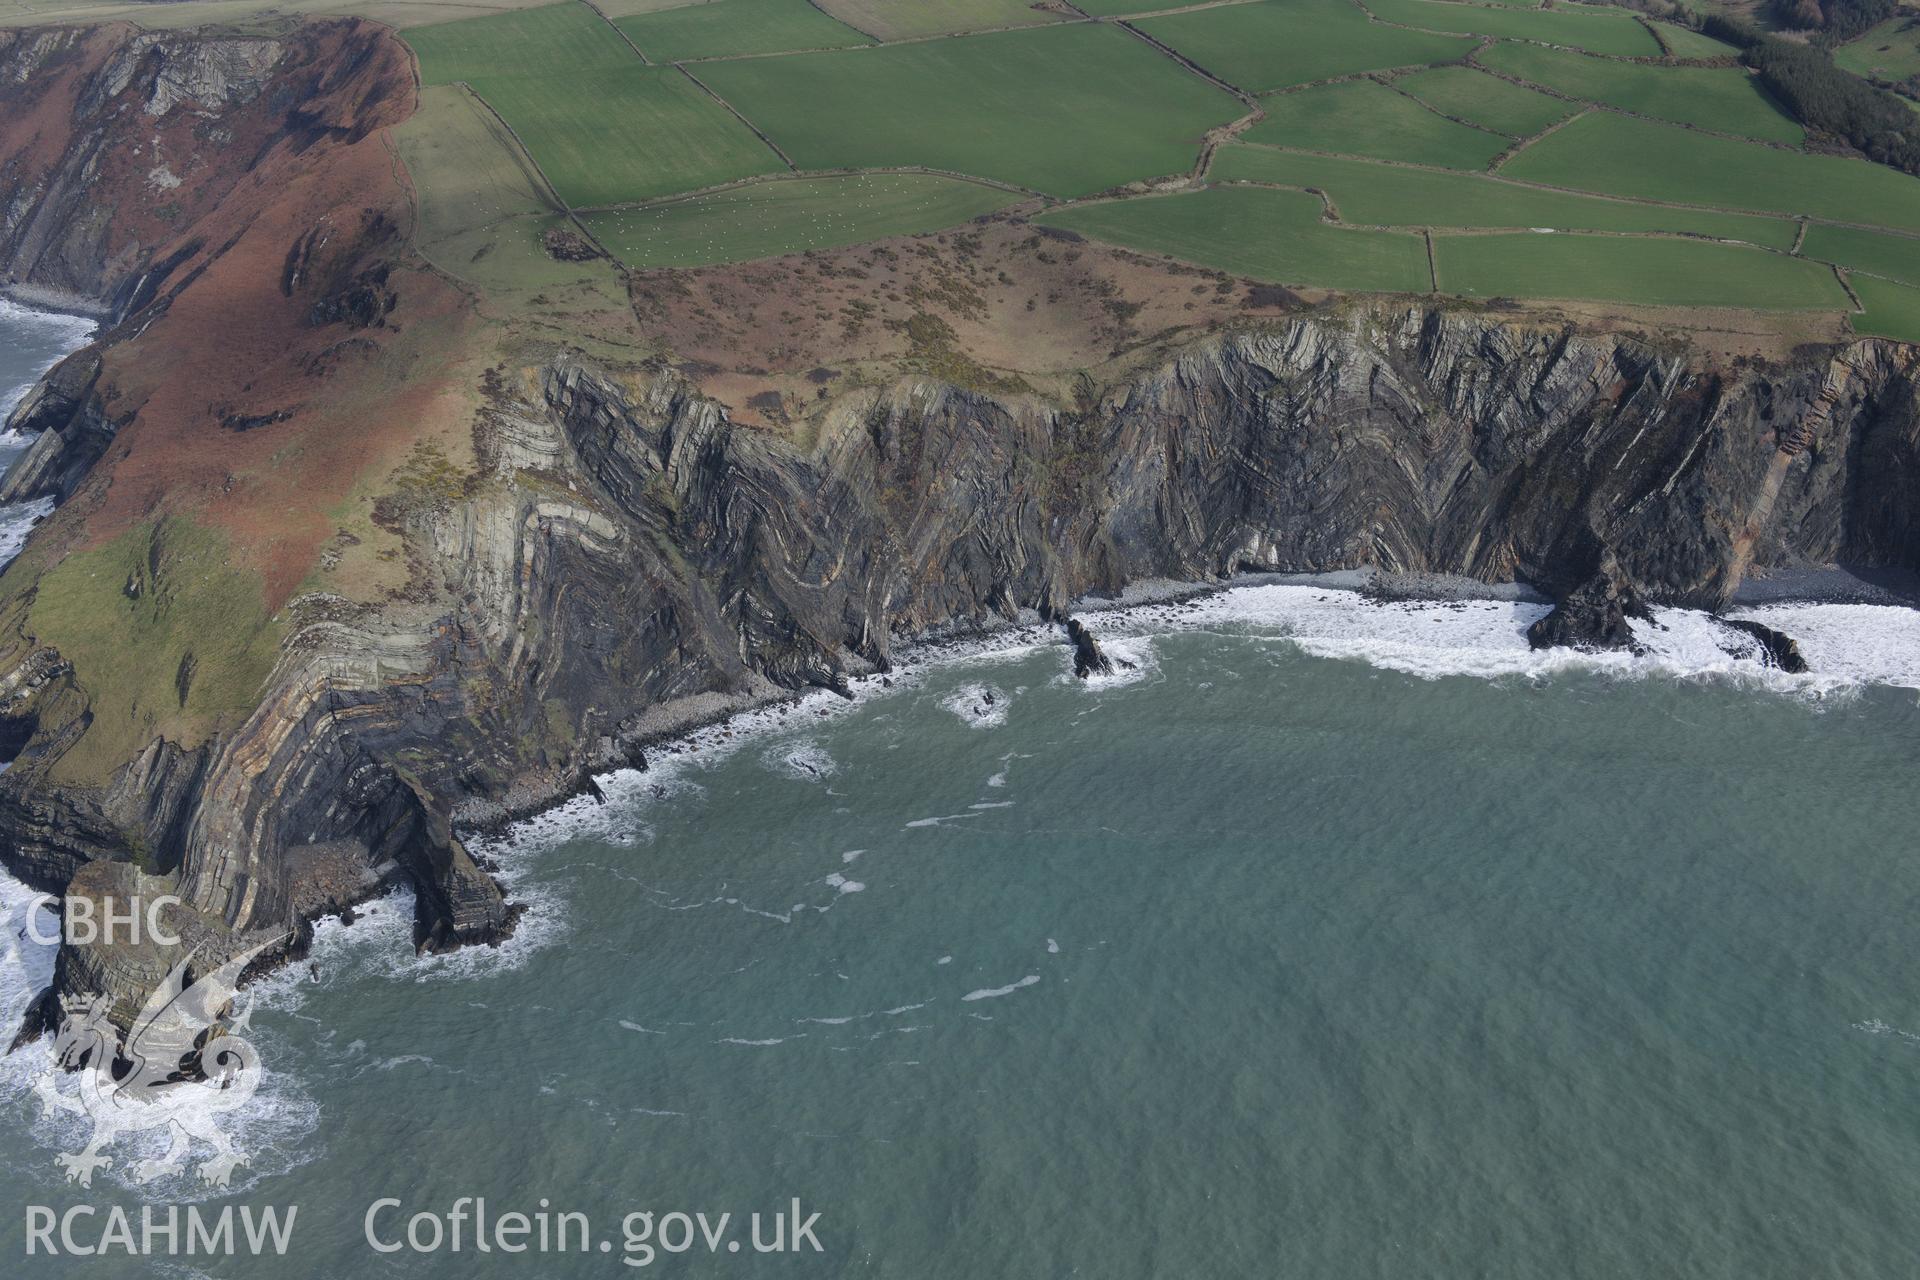 Visible strata in the rock face near Traeth y Rhedyn beach, north west of St. Dogmaels. The Pembrokeshire Coast Path follows the edges of the fields above. Oblique aerial photograph taken during the Royal Commission's programme of archaeological aerial reconnaissance by Toby Driver on 13th March 2015.